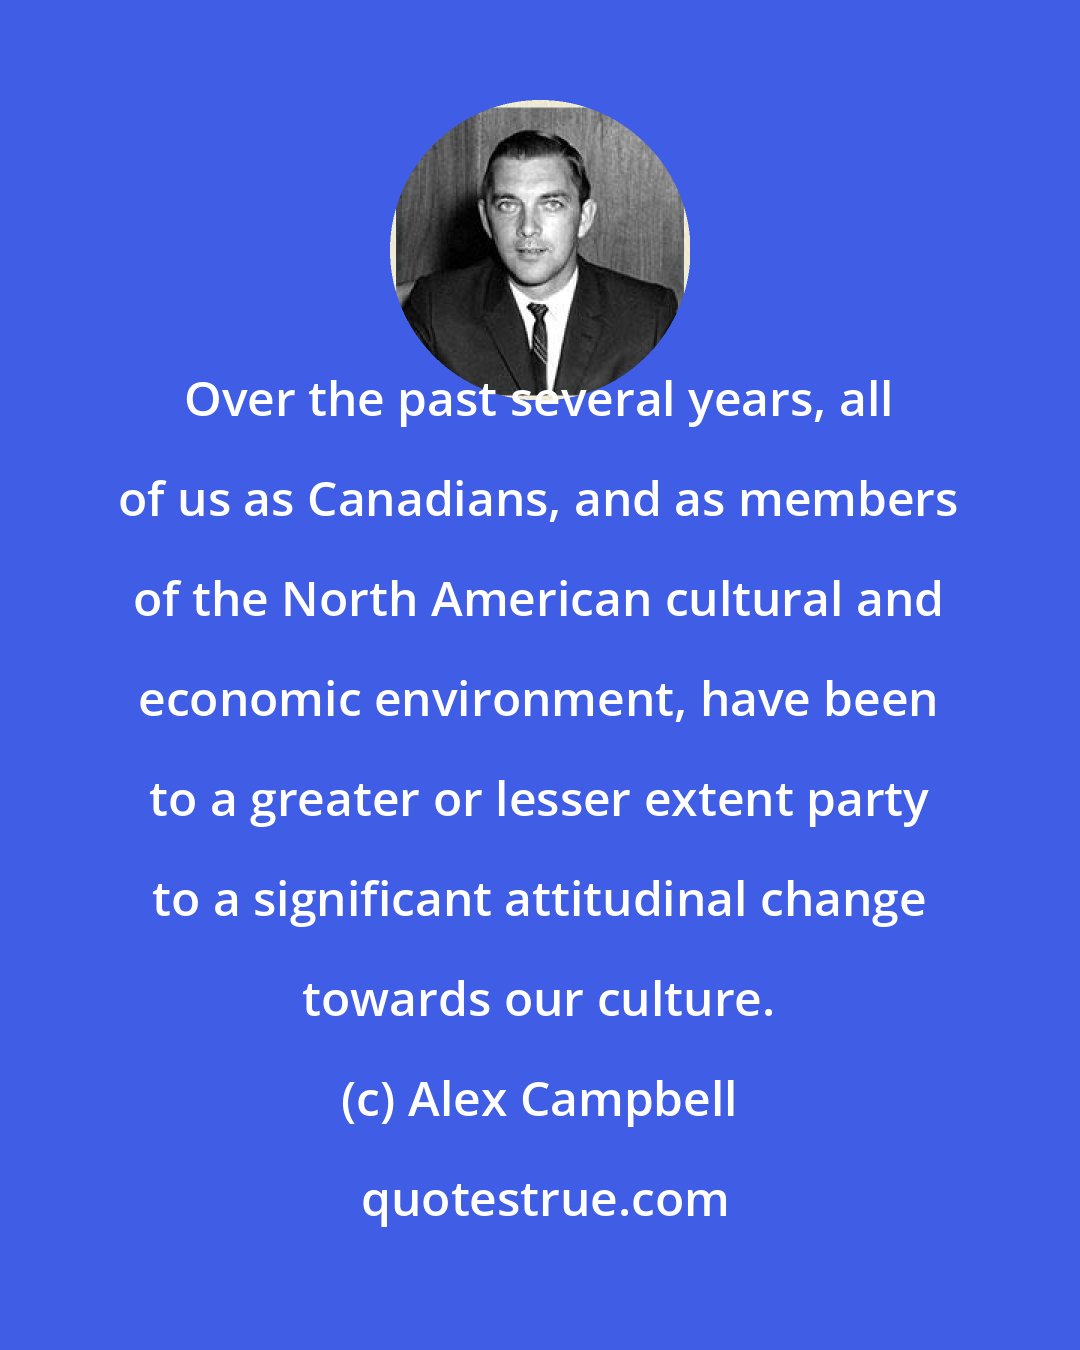 Alex Campbell: Over the past several years, all of us as Canadians, and as members of the North American cultural and economic environment, have been to a greater or lesser extent party to a significant attitudinal change towards our culture.